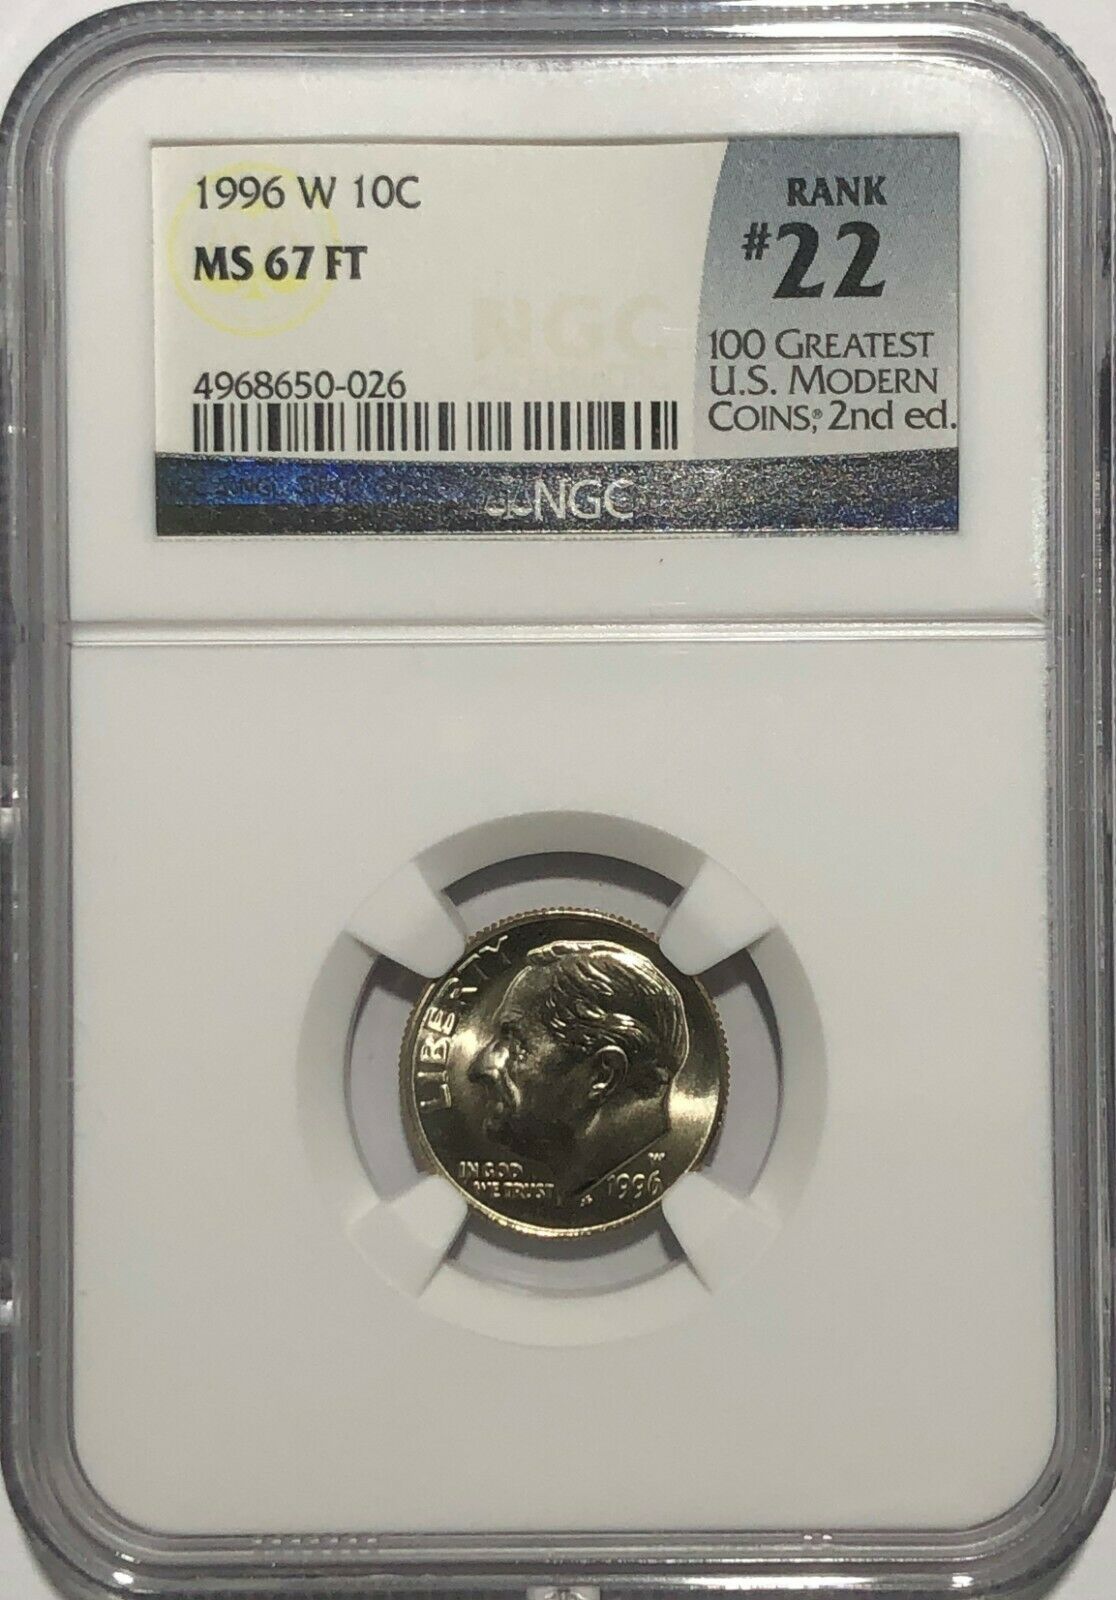 1996 W Roosevelt Dime Ngc Ms67 Ft Full Torch # 22of 100 Greatest Us Modern Coins